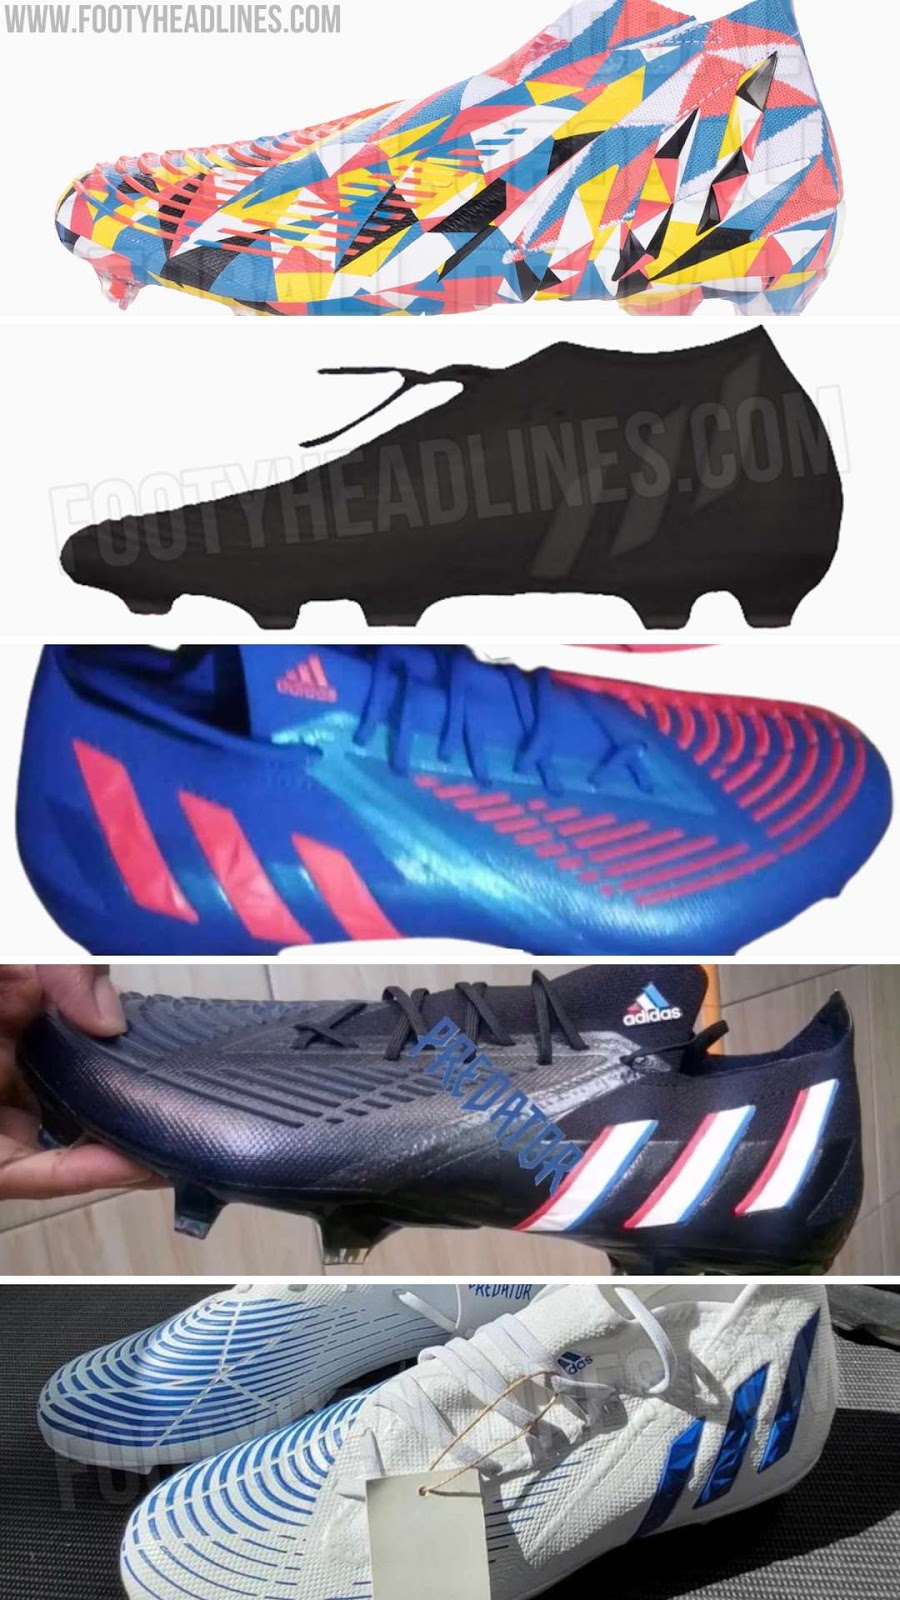 Petition Scully Viewer All Leaked Next-Gen Adidas Predator Edge Boots - Footy Headlines